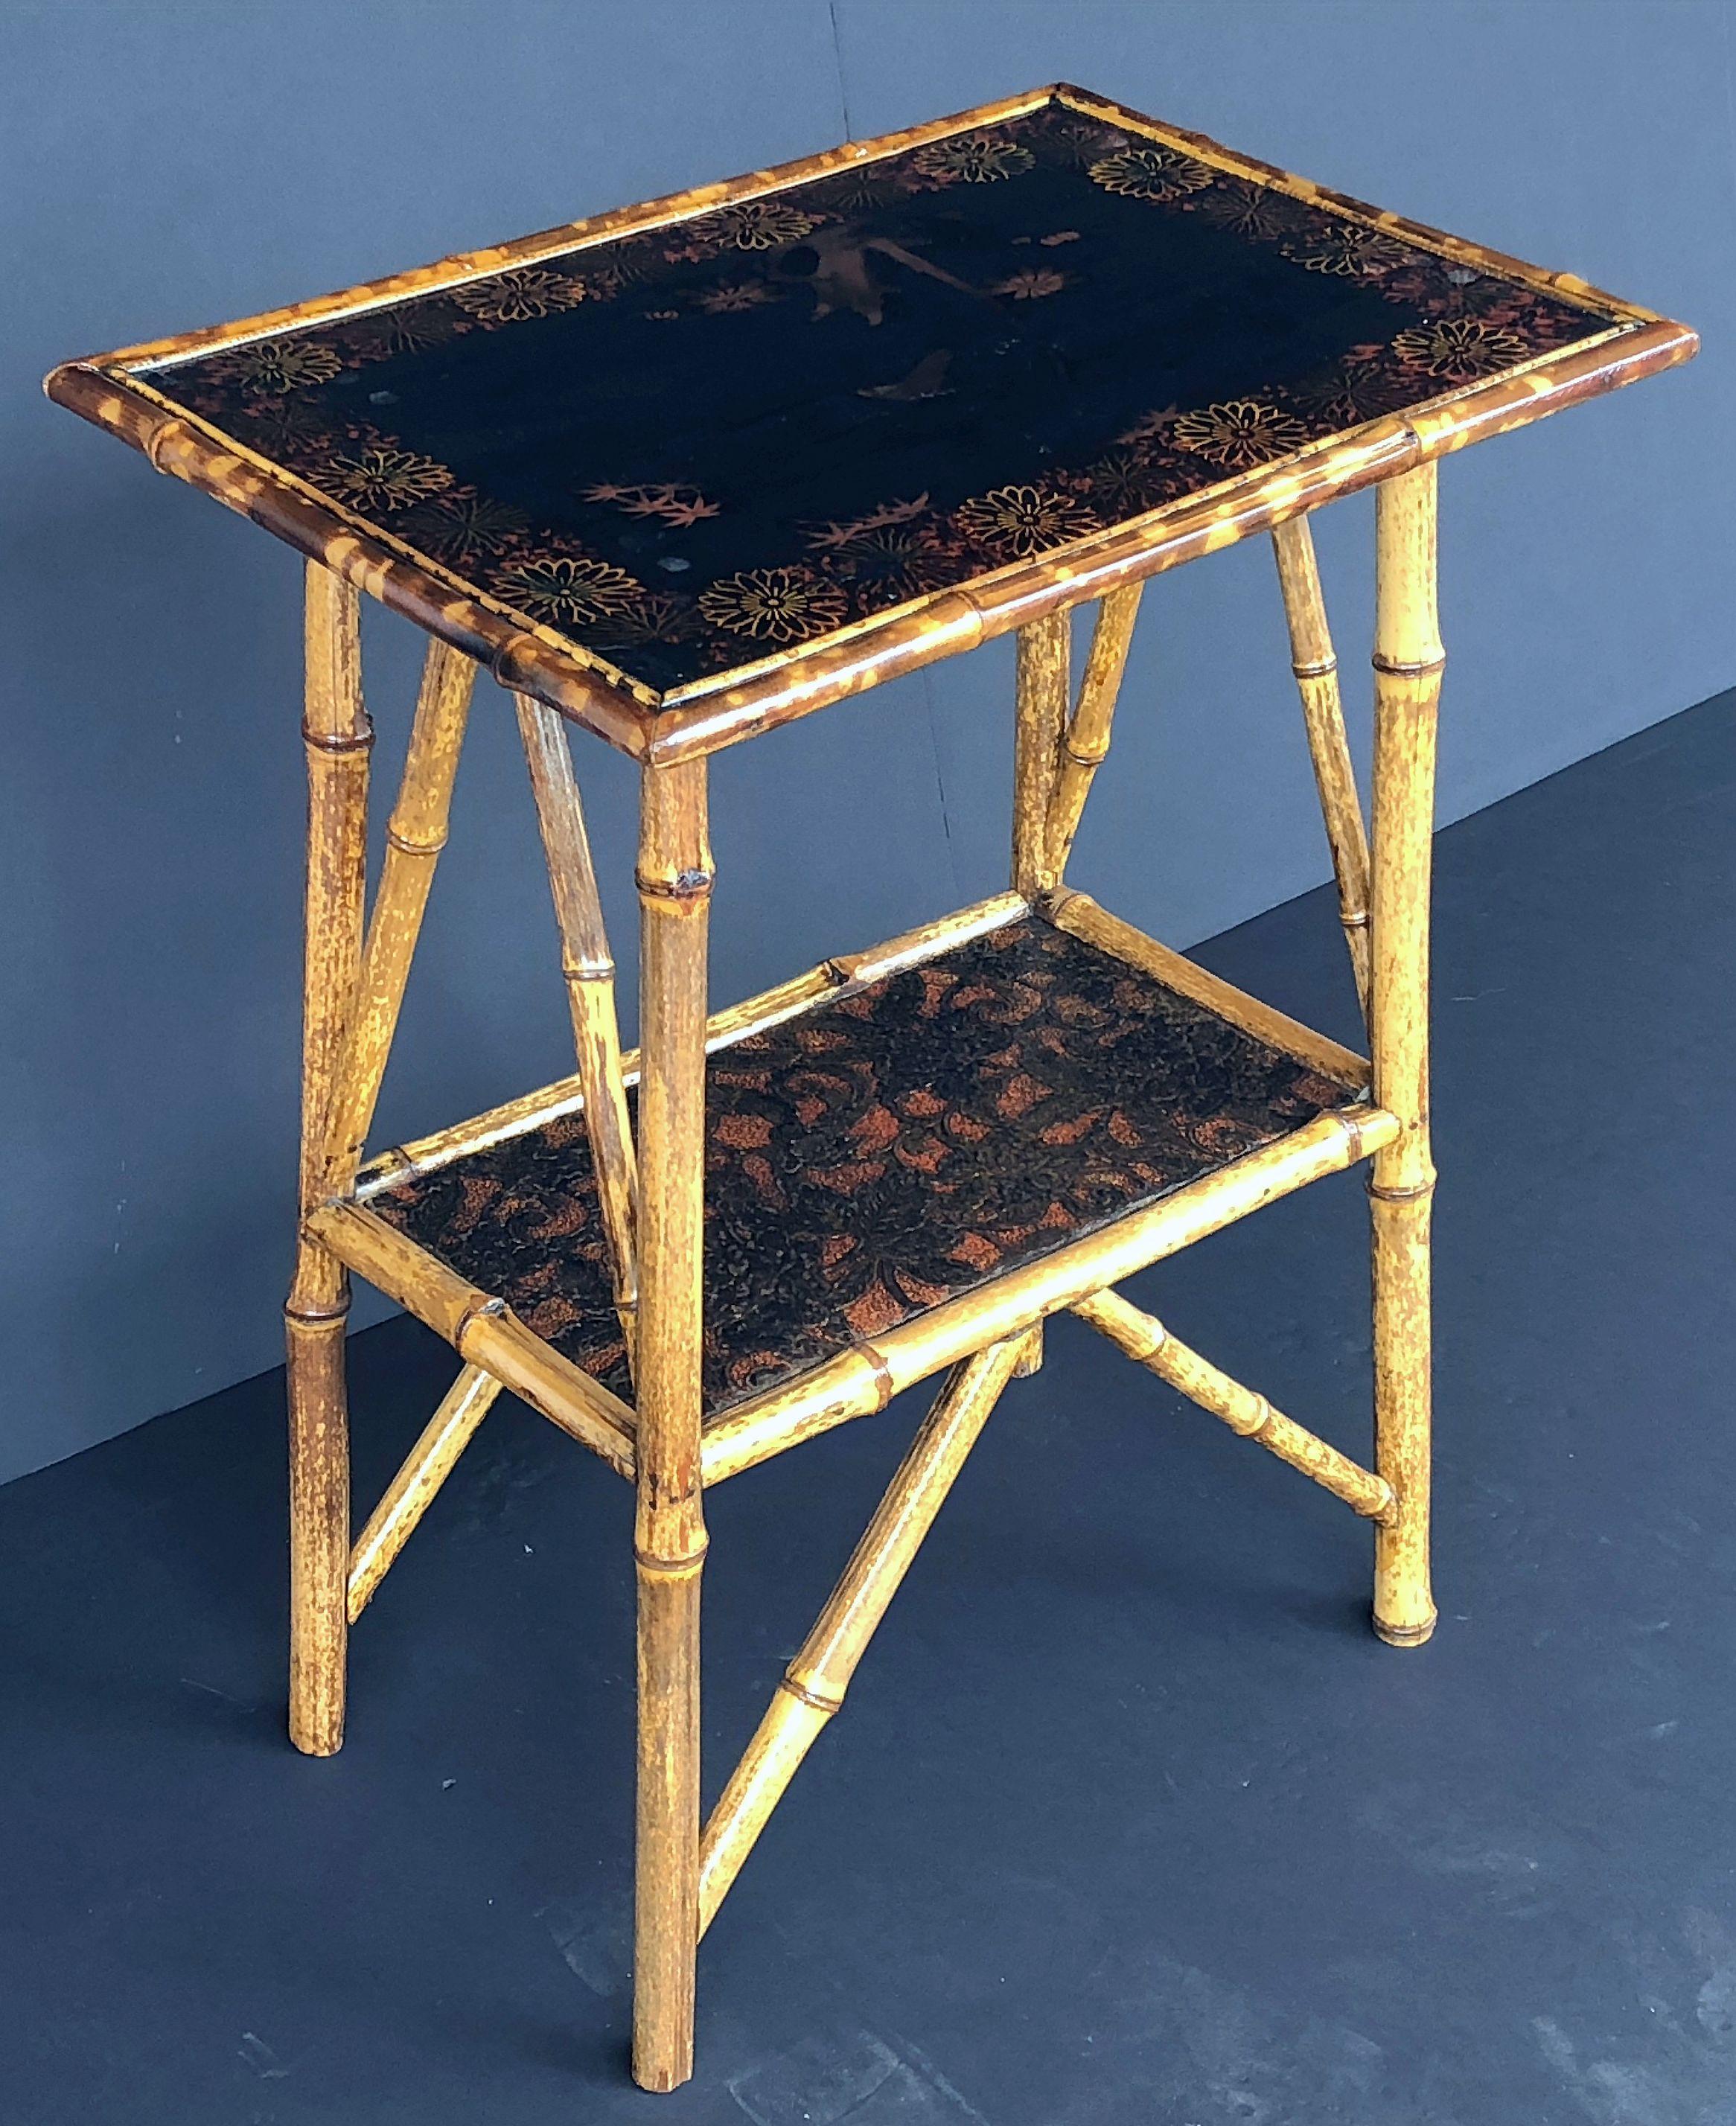 A fine English bamboo table (side or occasional) featuring a rectangular top with Japan lacquered chinoiserie design, over a stretcher base with rectangular pressed paper design panel and ornamental fretwork running diagonally at each corner.